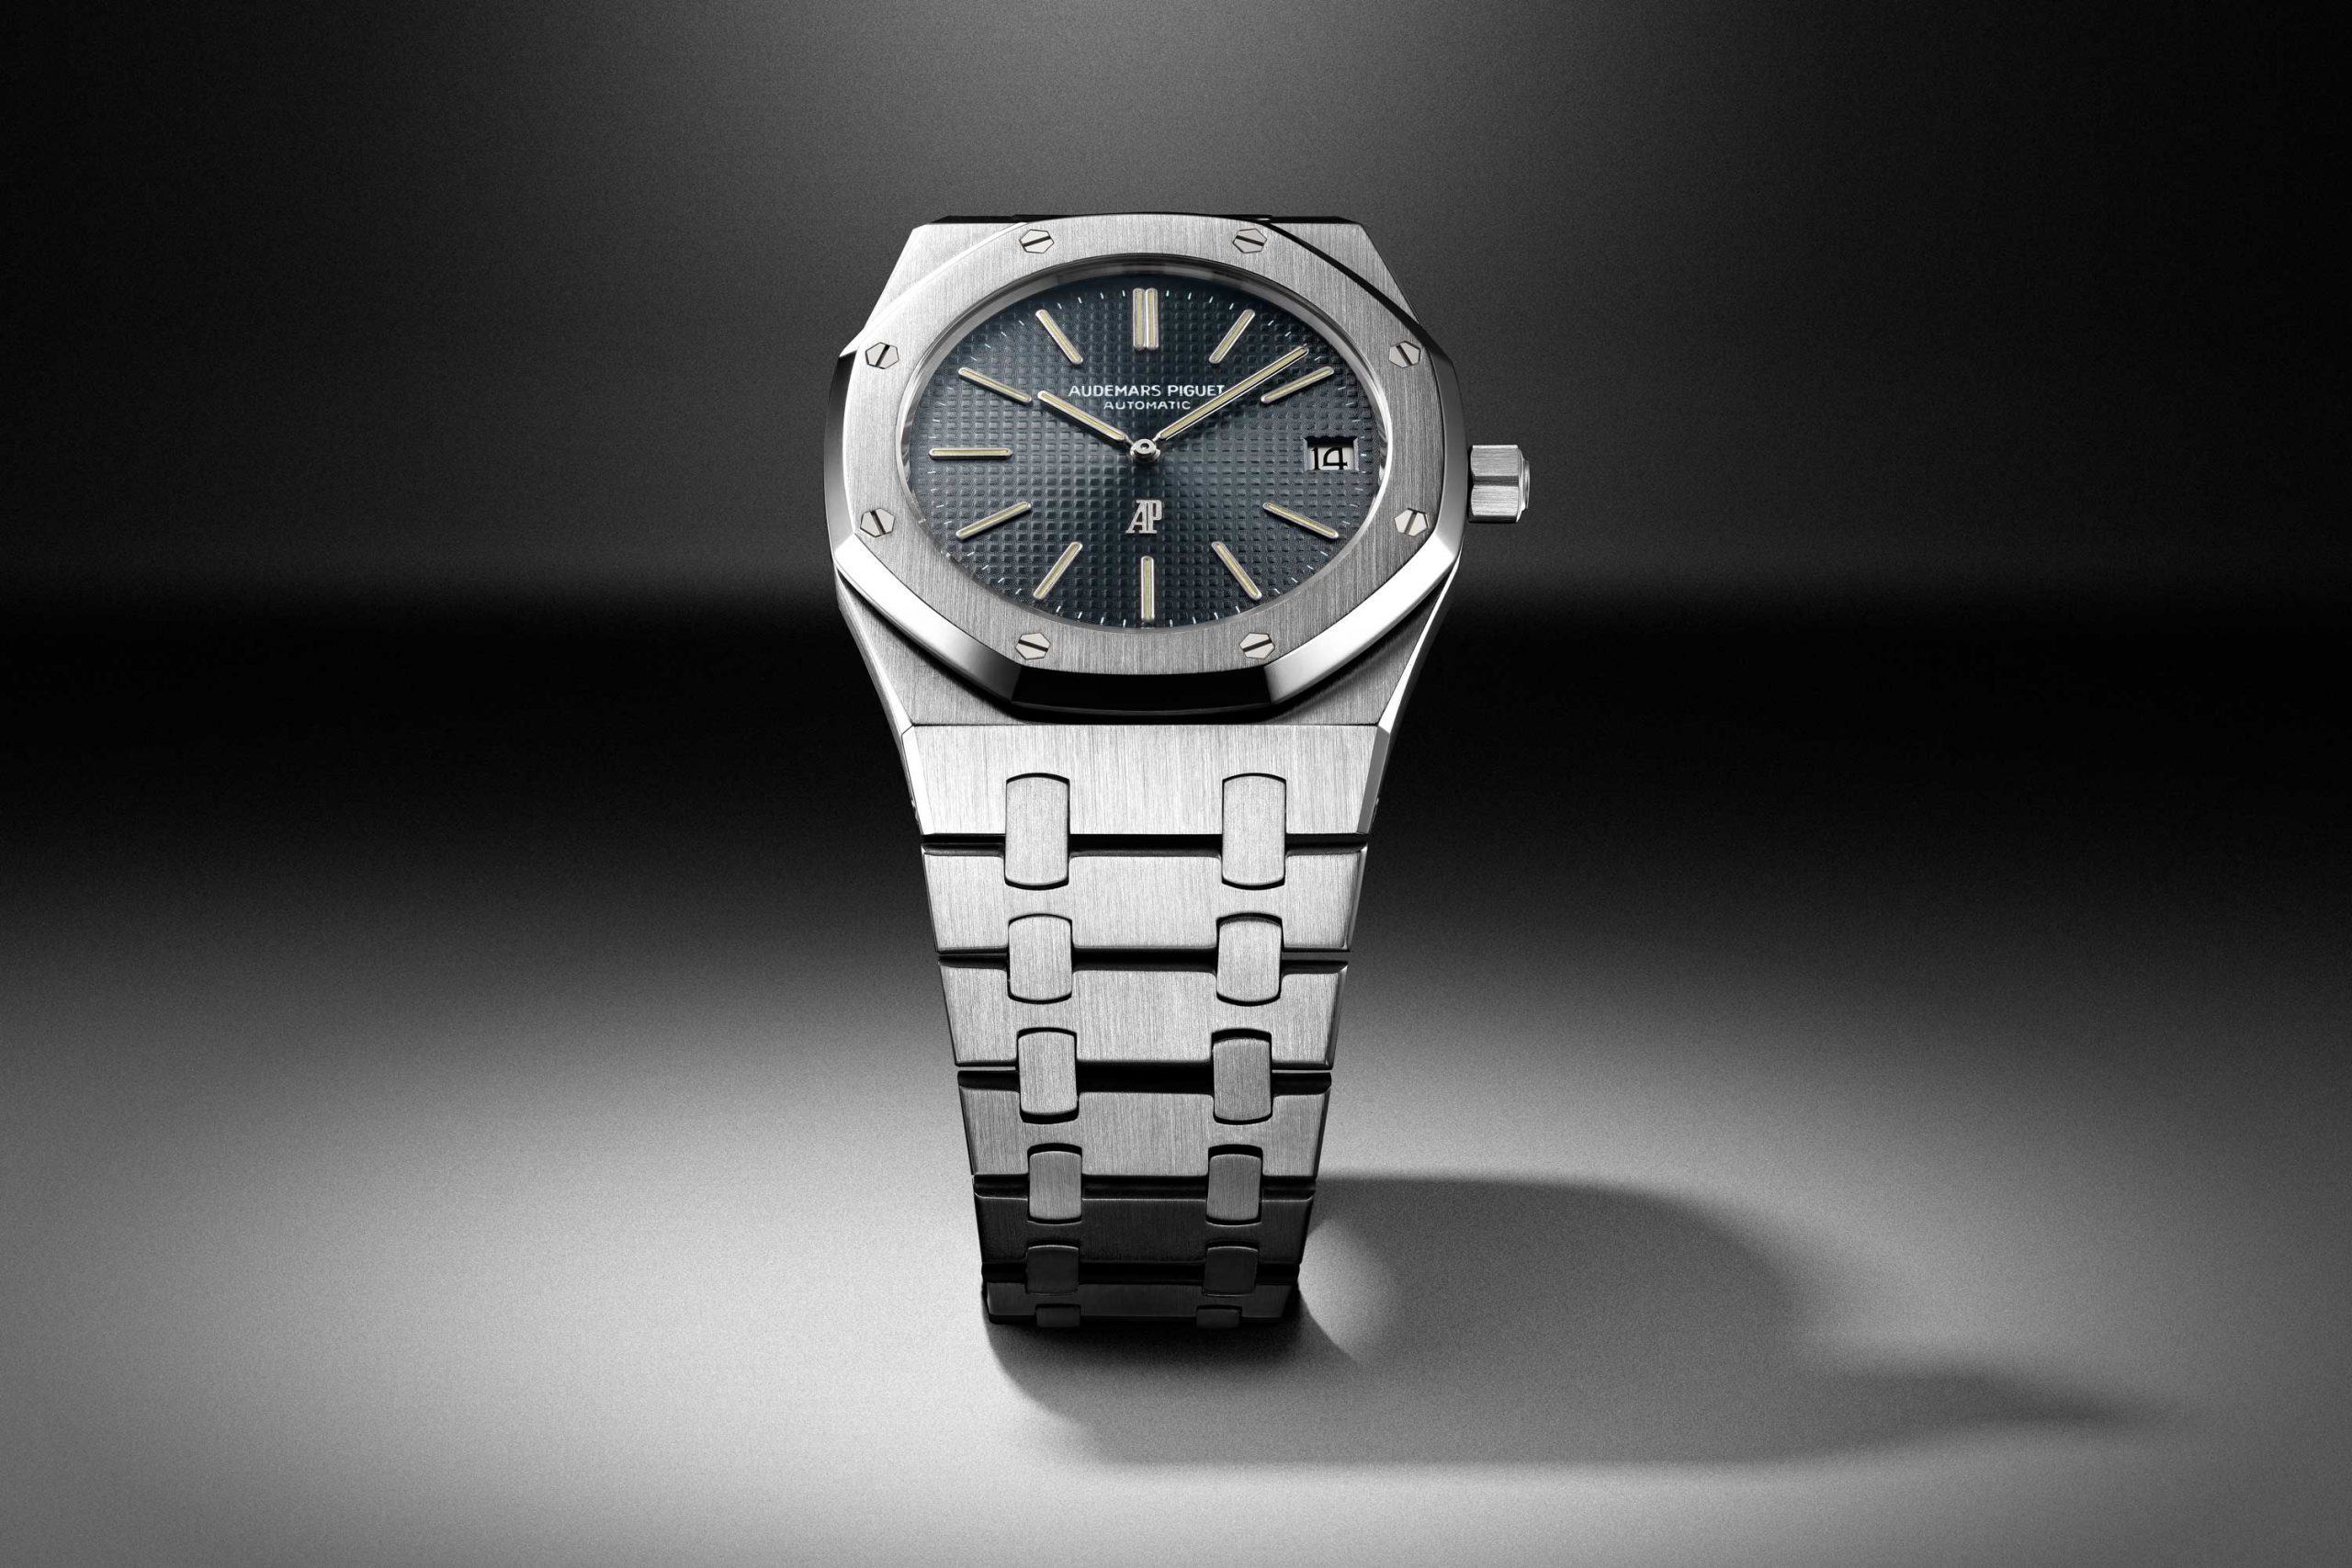 The 1972 Audemars Piguet Royal Oak Ref. 5402ST; the instance pictured here is case no. A 26 and part of the AP Heritage Collection (Inv. 365)